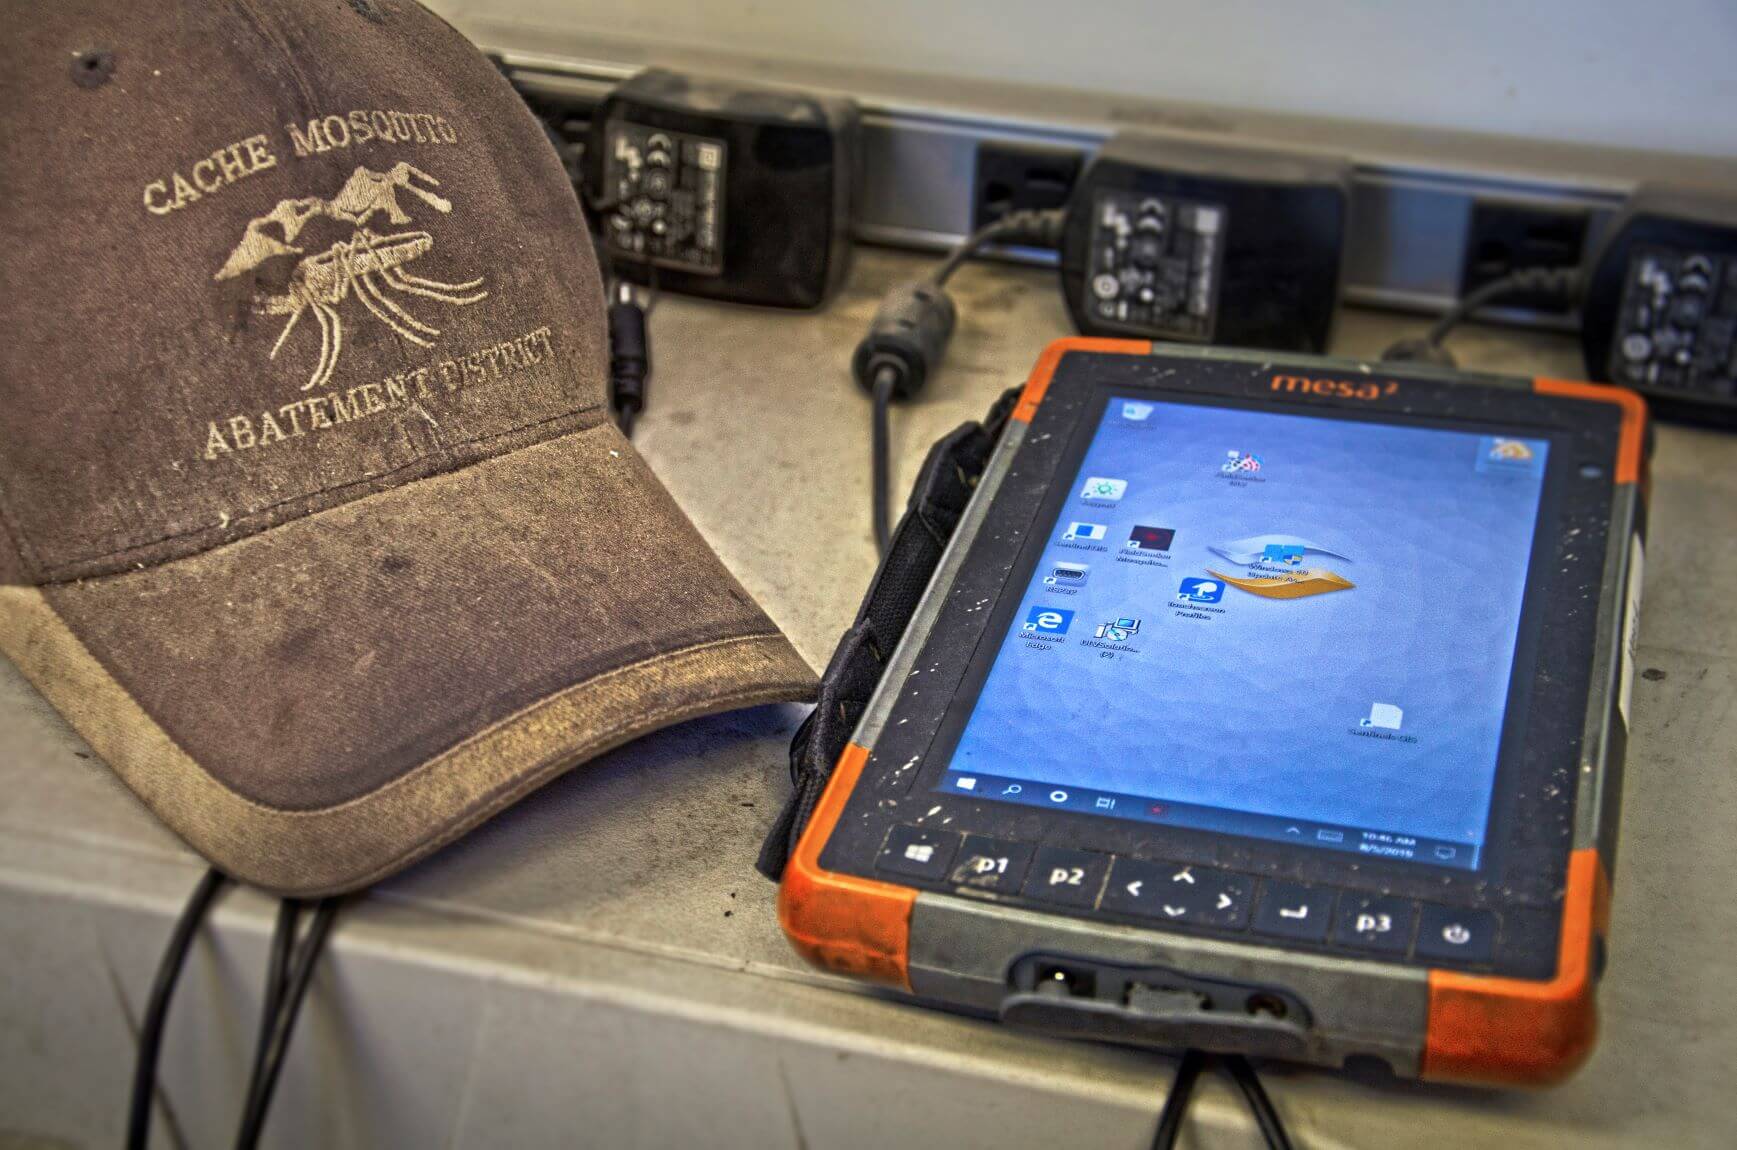 The Cache Mosquito Abatement District takes to the streets with the Mesa 2 Rugged Tablet